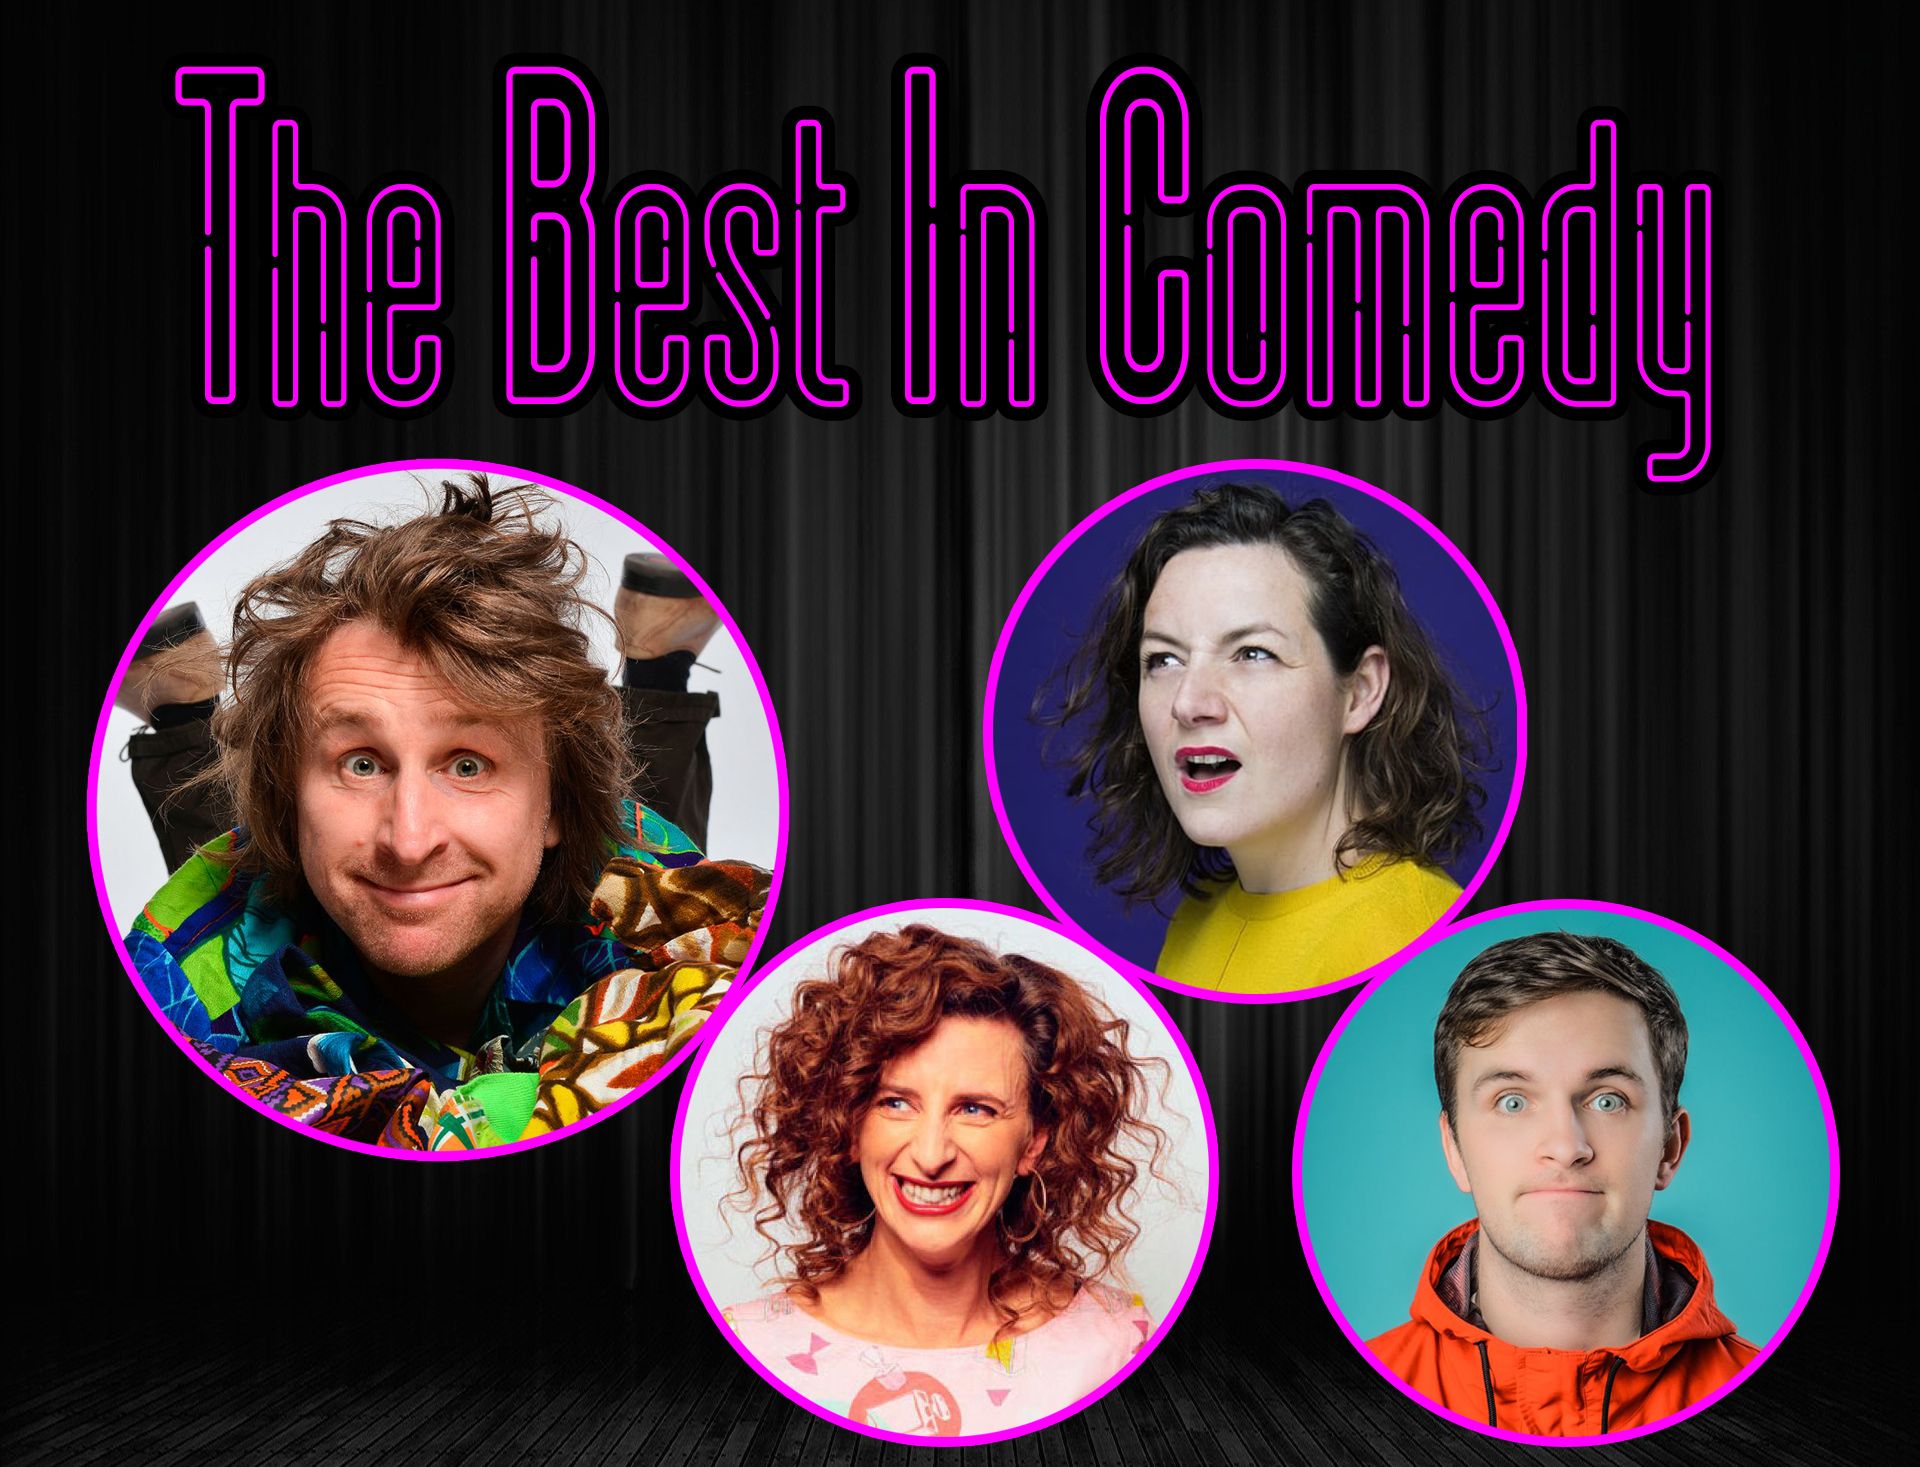 The Best in Comedy – June